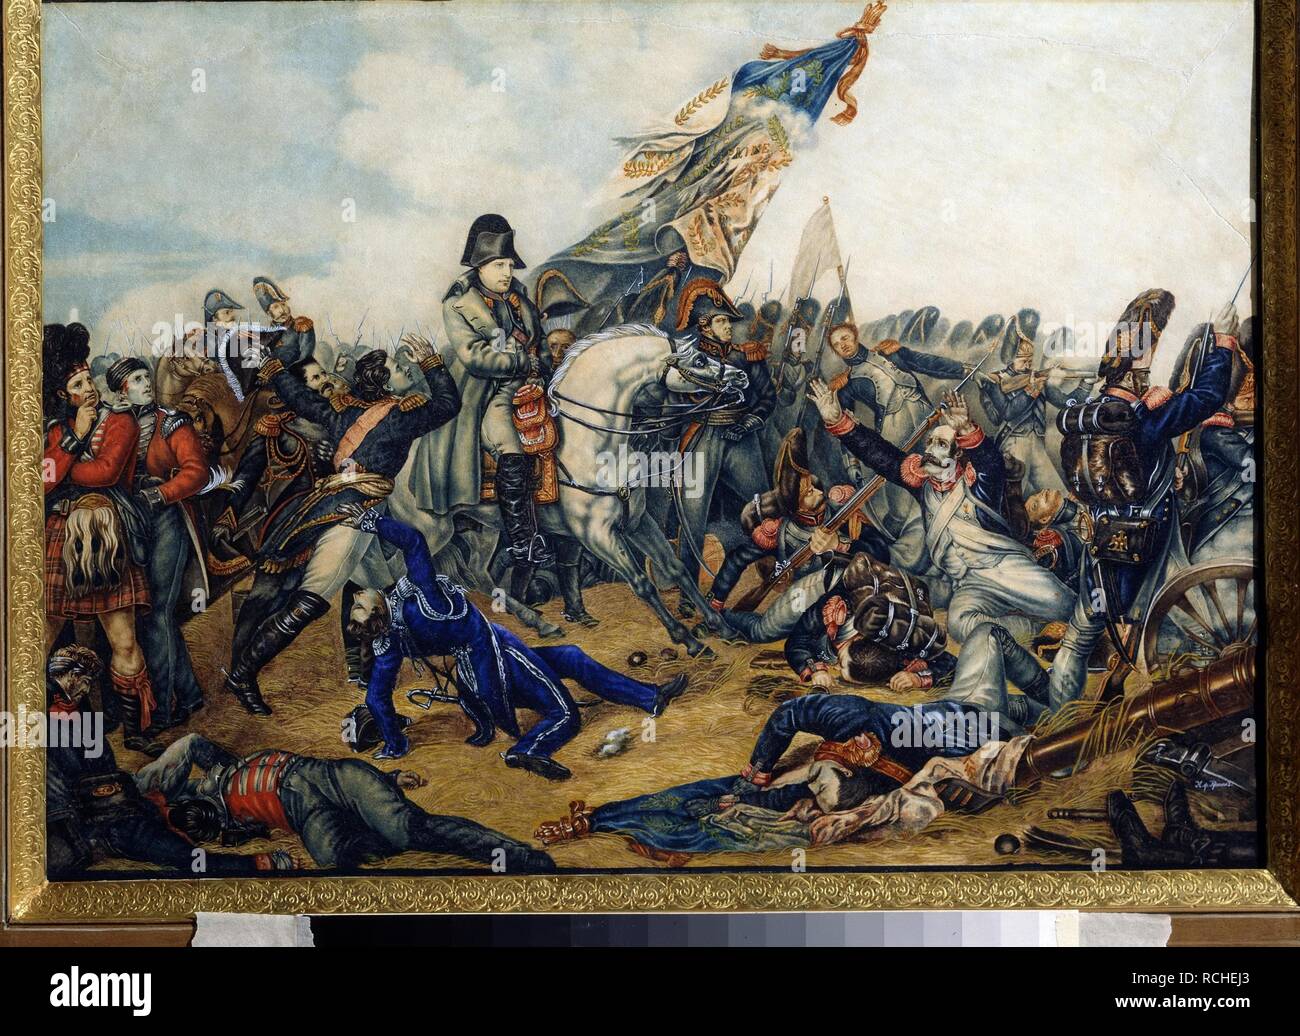 The Battle of Waterloo. Museum: State Borodino War and History Museum, Moscow. Author: Steuben, Charles de. Stock Photo